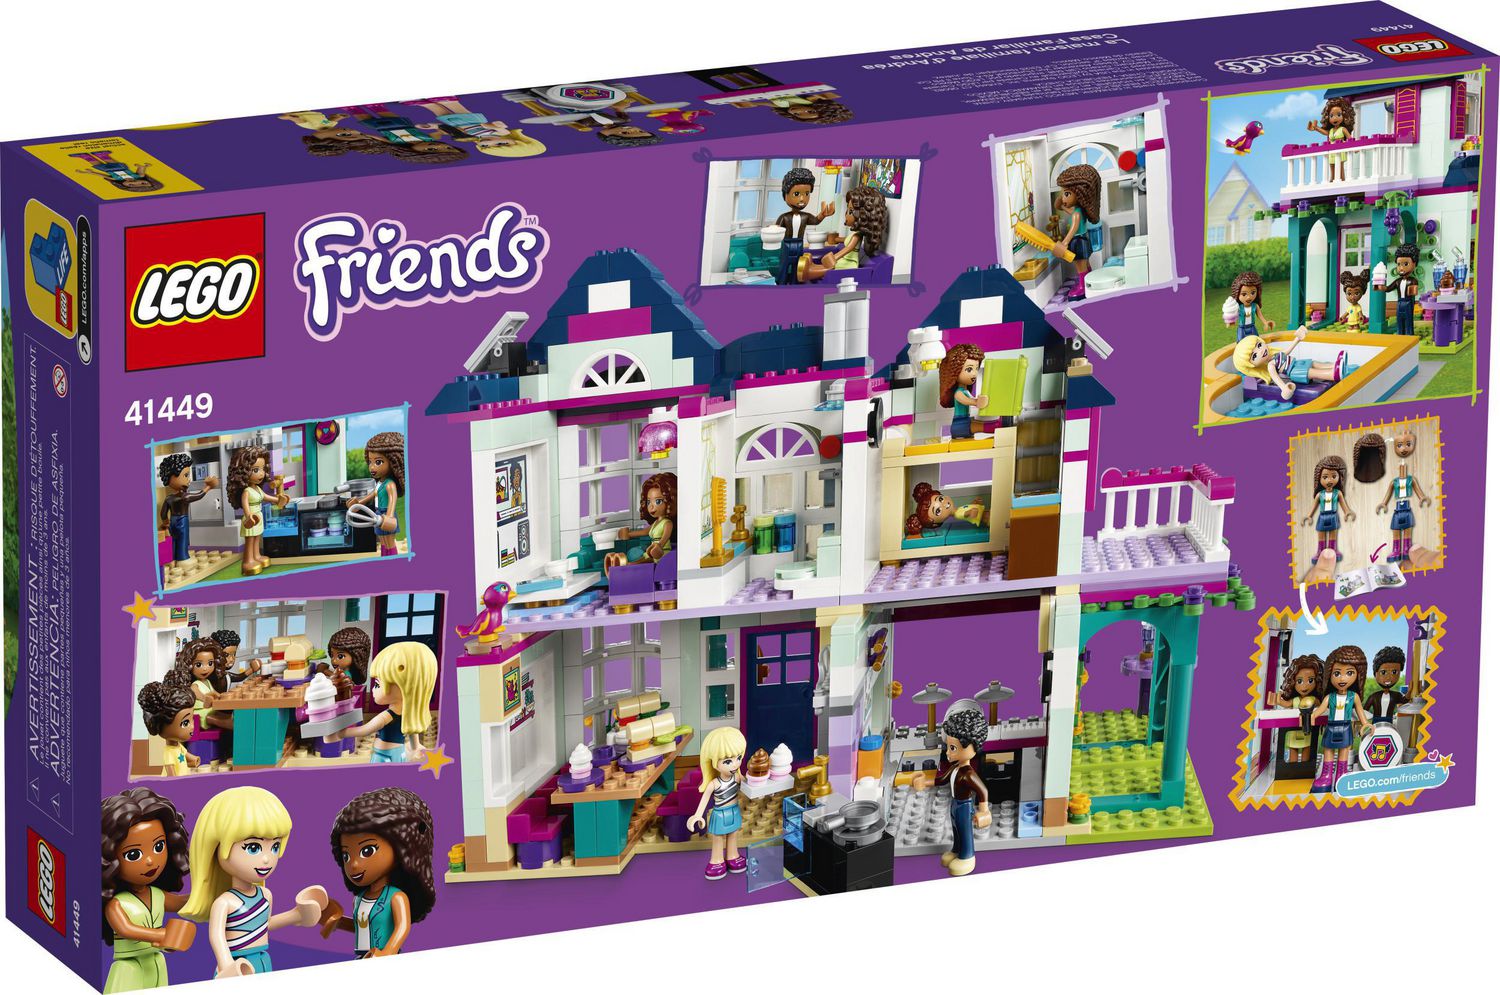 LEGO Friends Andrea's Family House 41449 Toy Building Kit (802